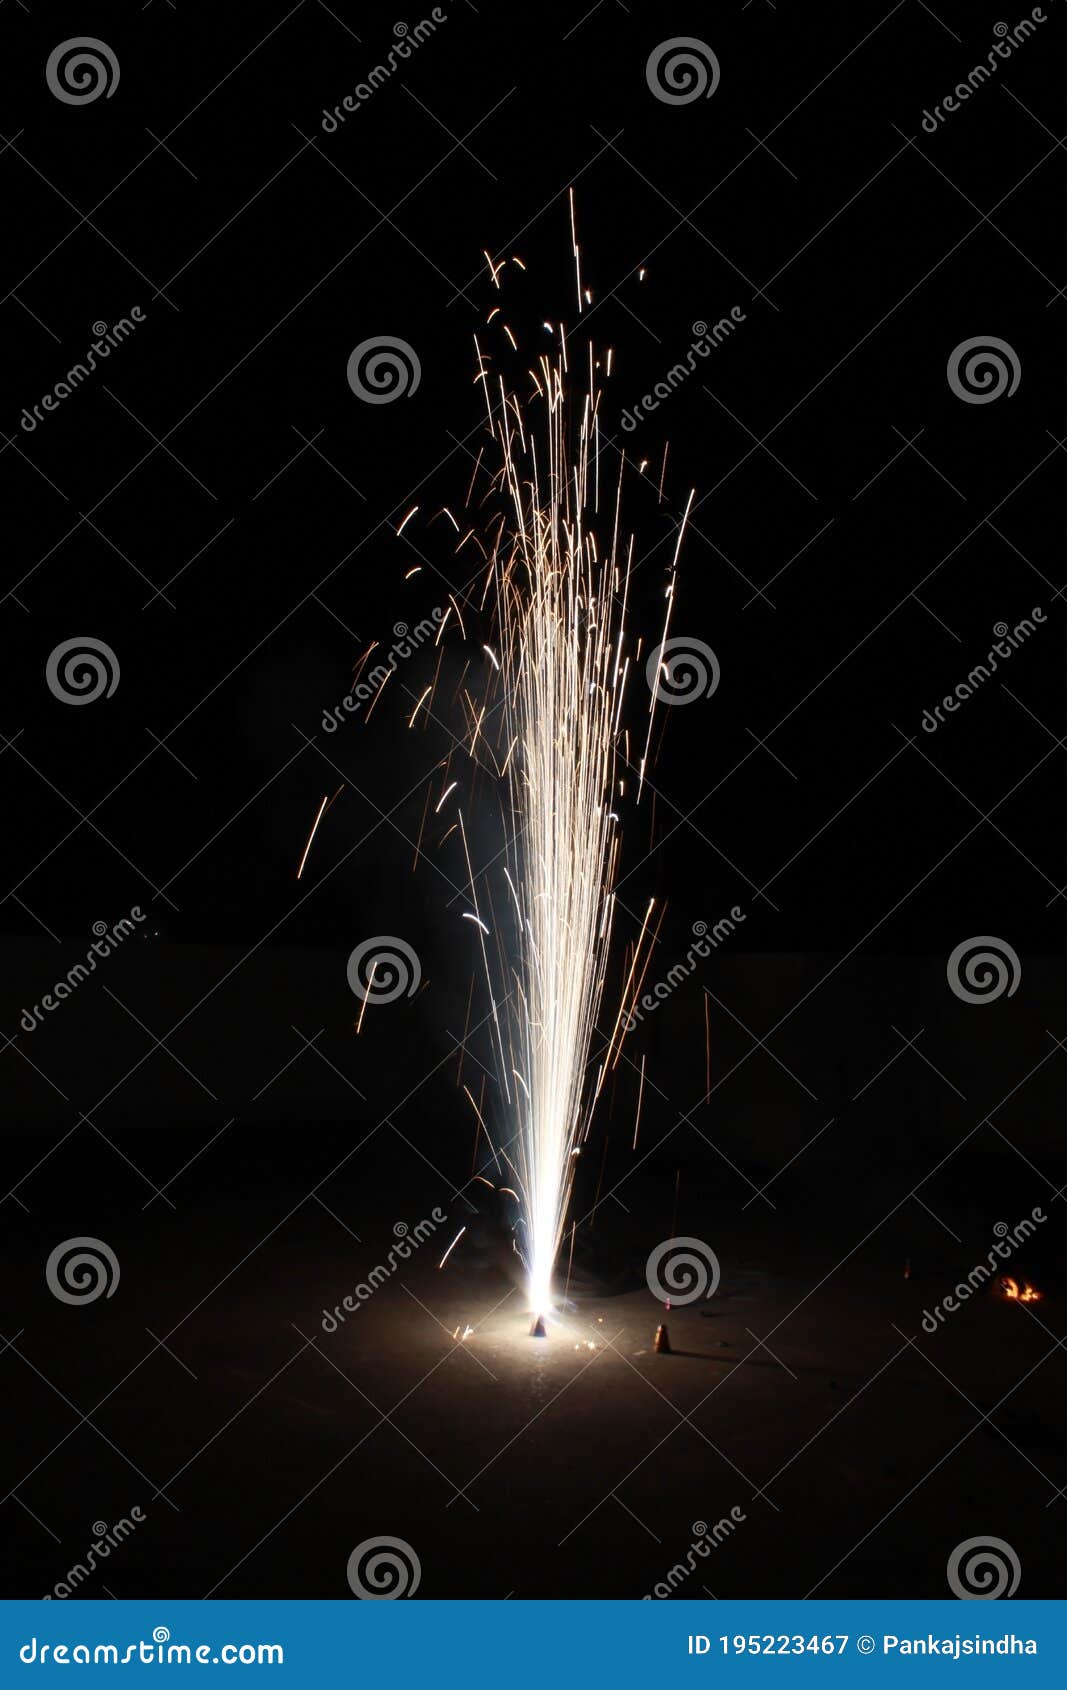 Diwali Crackers Lighting in Dark Background with Sparkles Stock Image -  Image of diwali, sparkles: 195223467